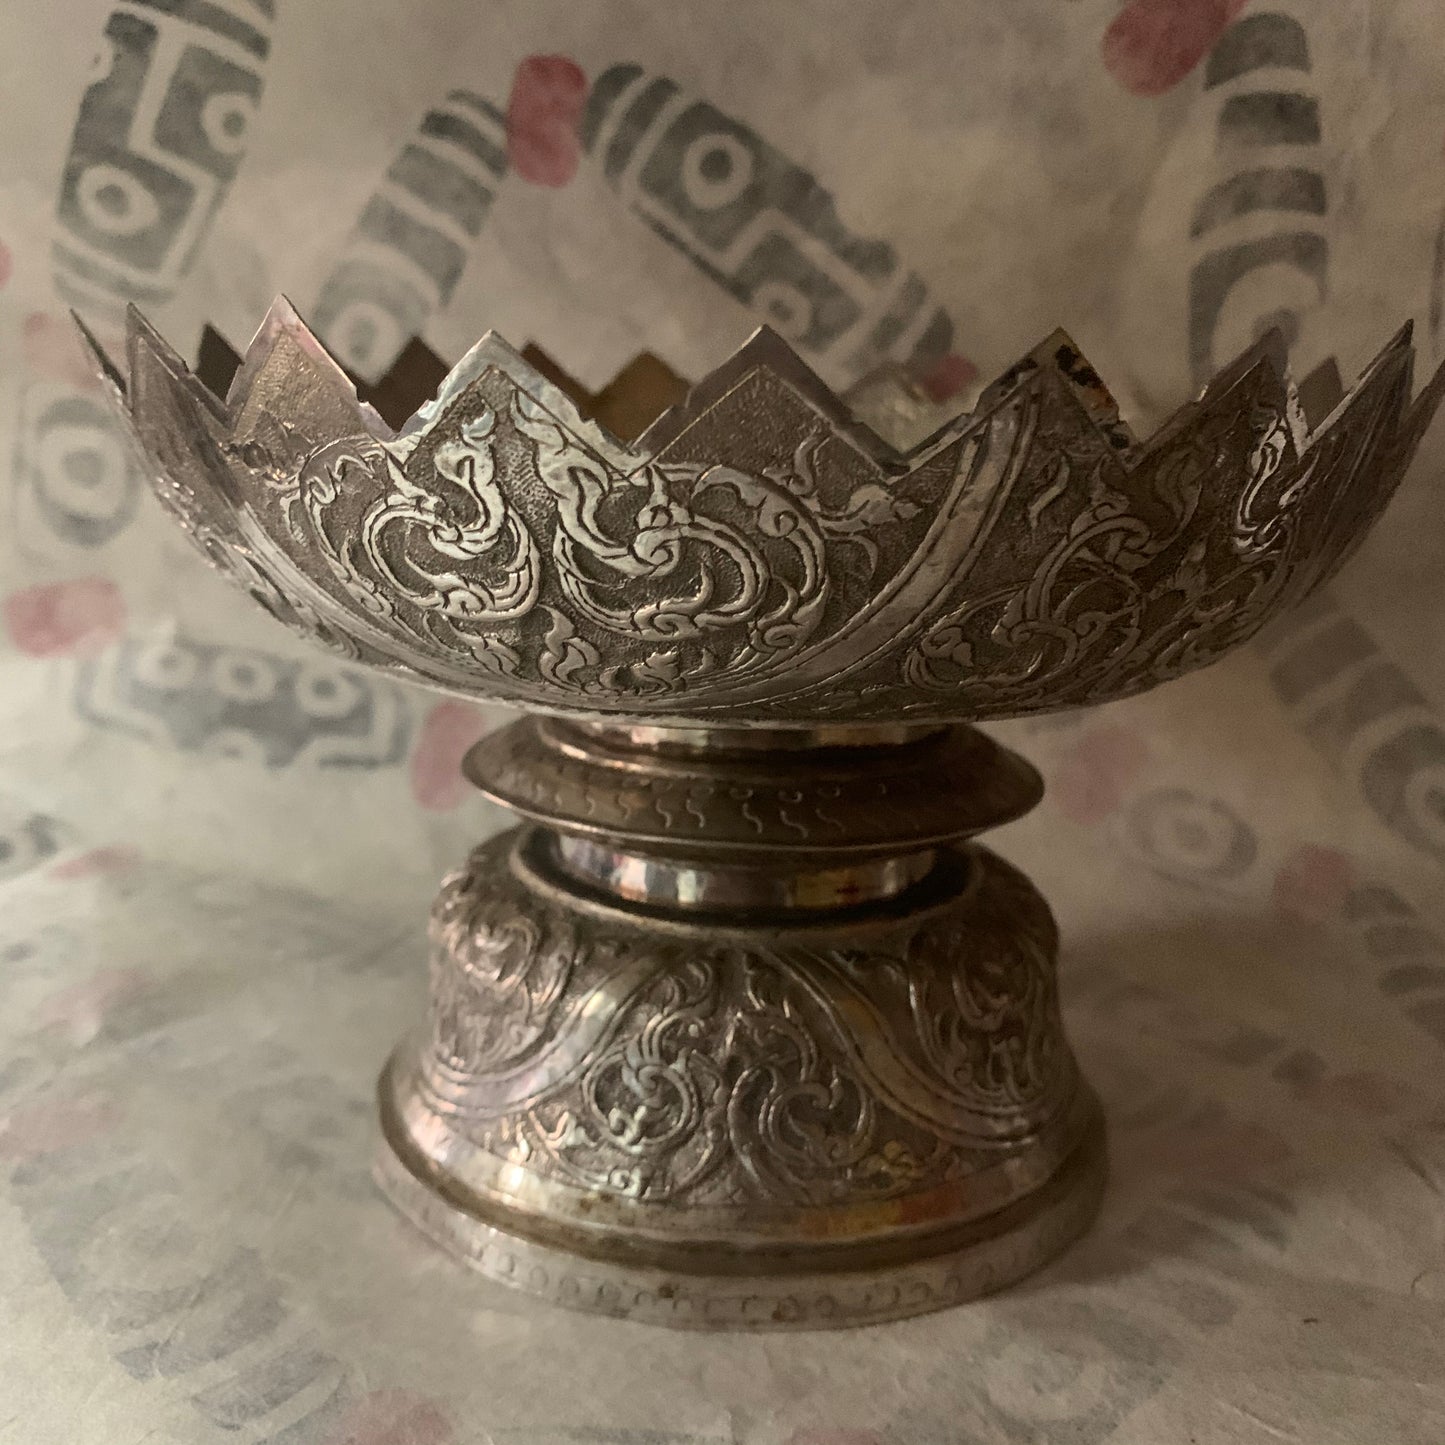 An antique silver fruit bowl stand